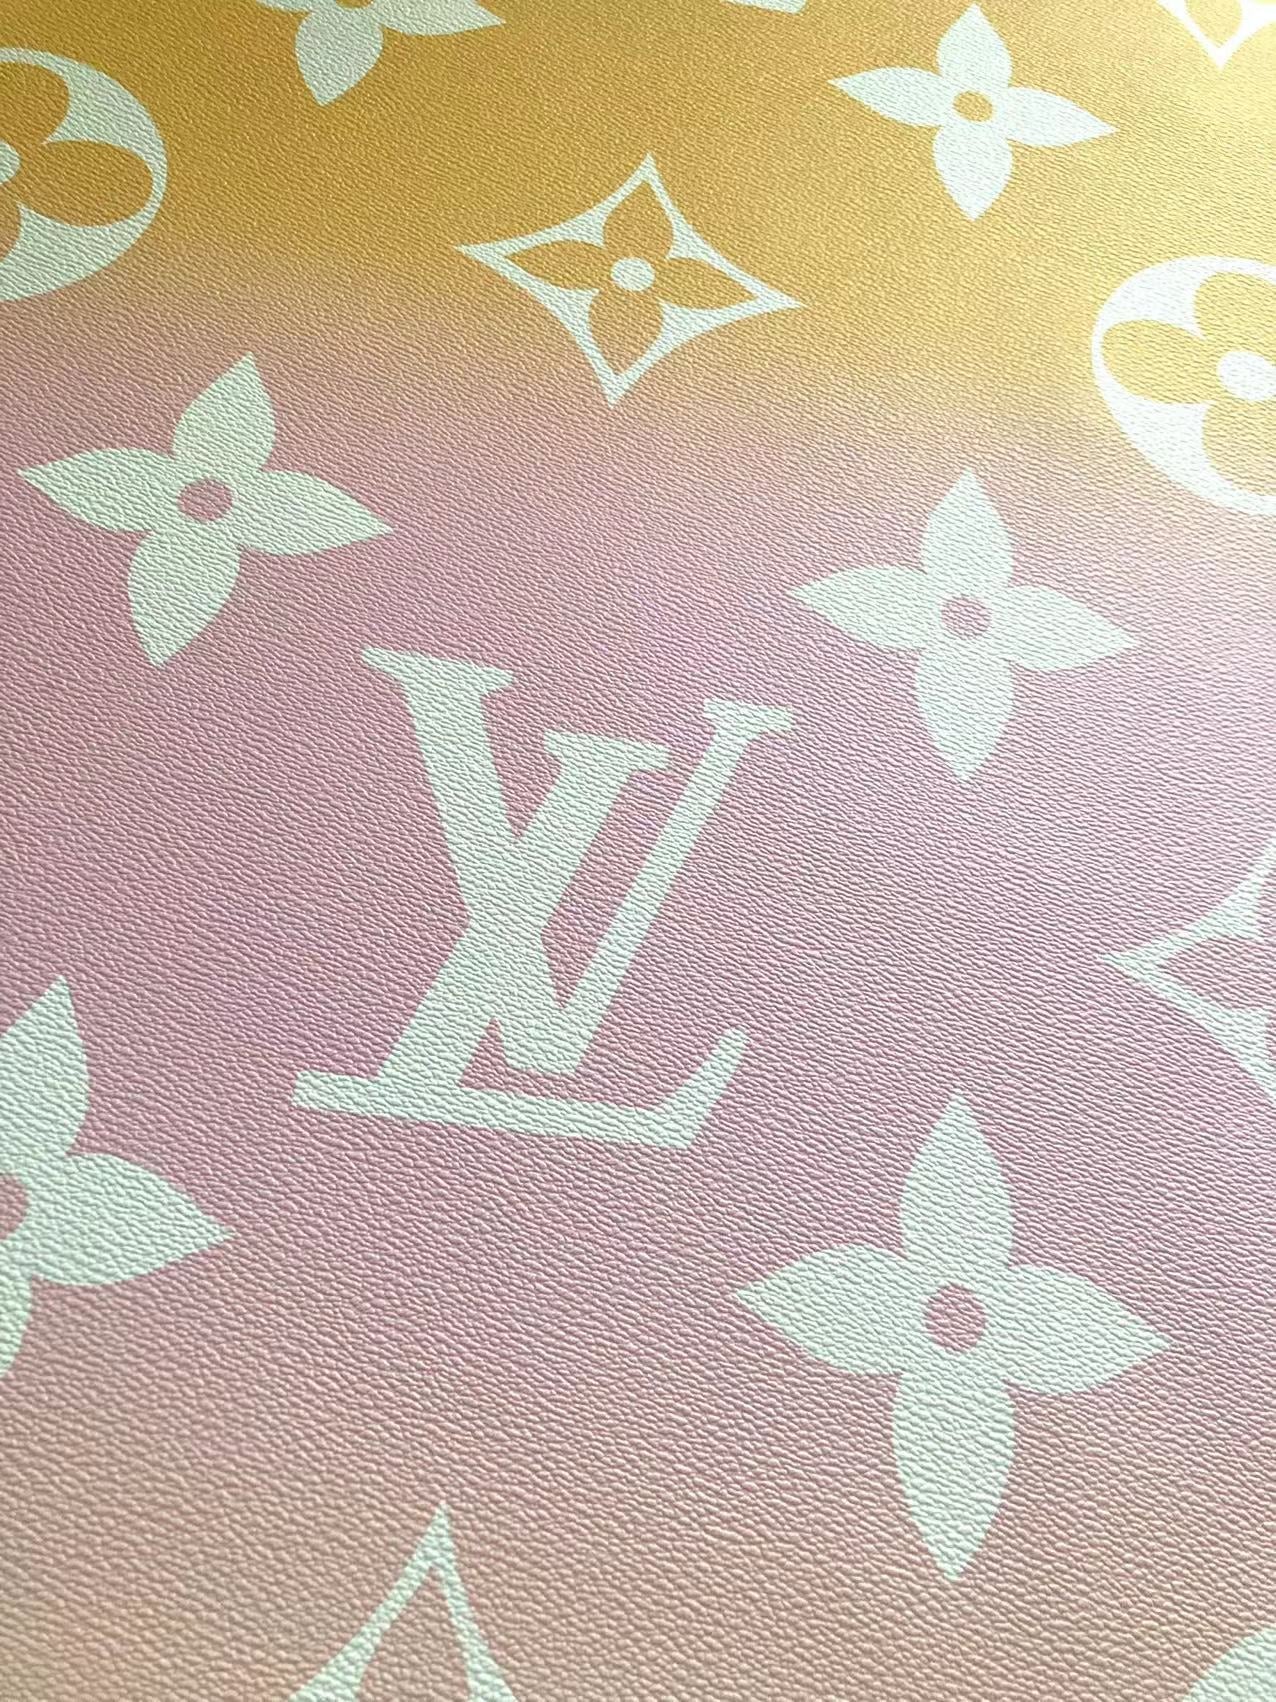 Colorful LV By the Pool Leather Fabric for Bag Custom